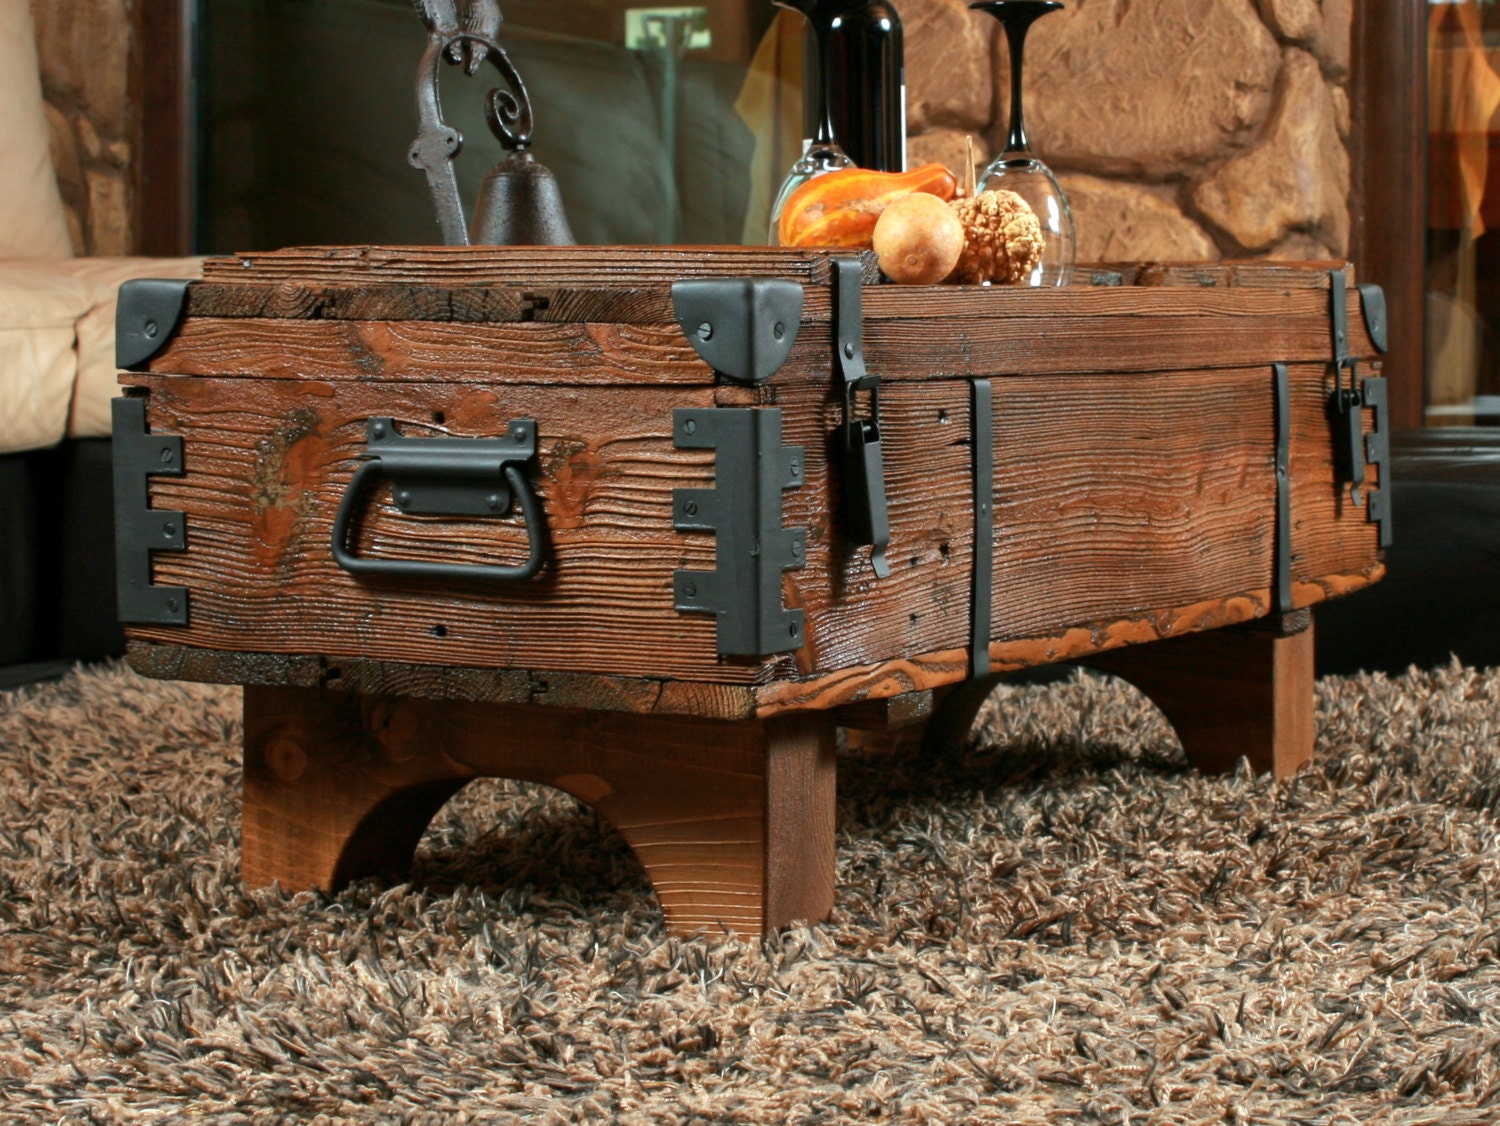 RC Willey - We are obsessed with this rustic trunk coffee table